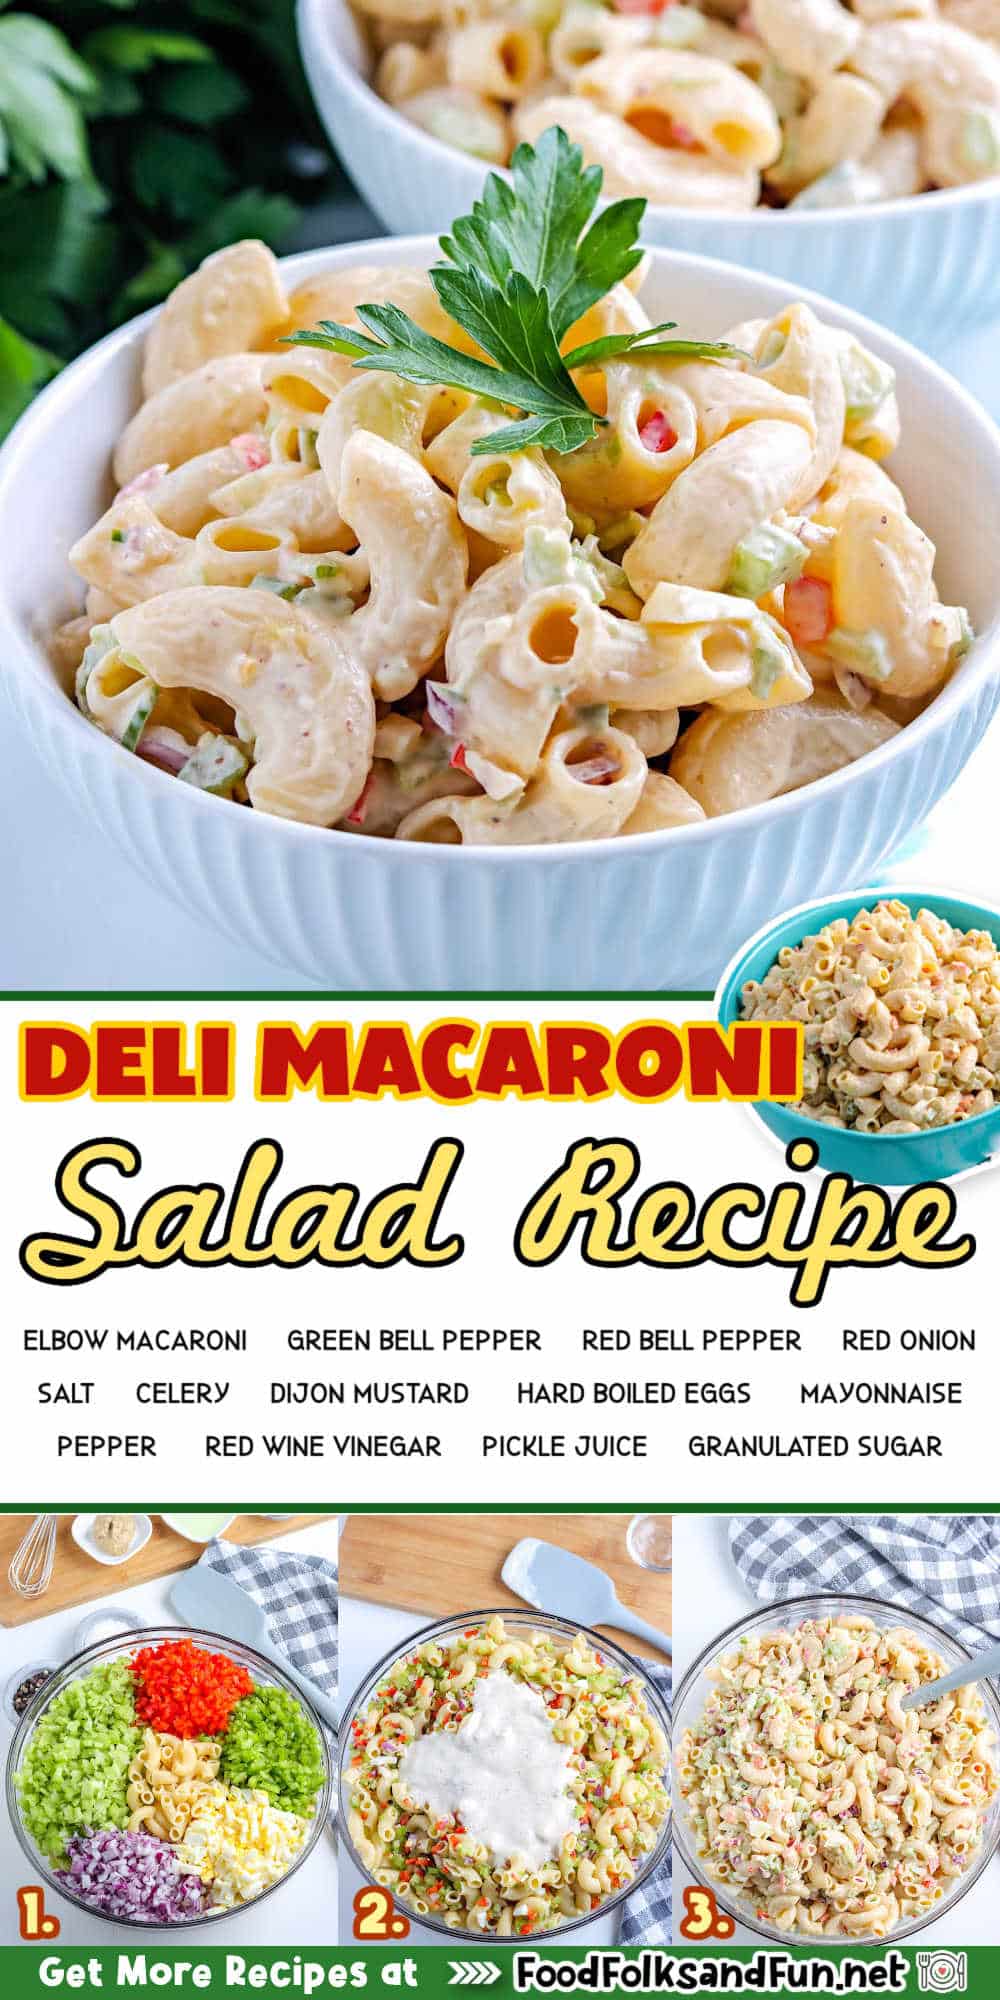 Packed with flavor and texture, this creamy and tangy Deli Style Macaroni Salad features tender macaroni, crisp veggies, and zesty dressing.  via @foodfolksandfun